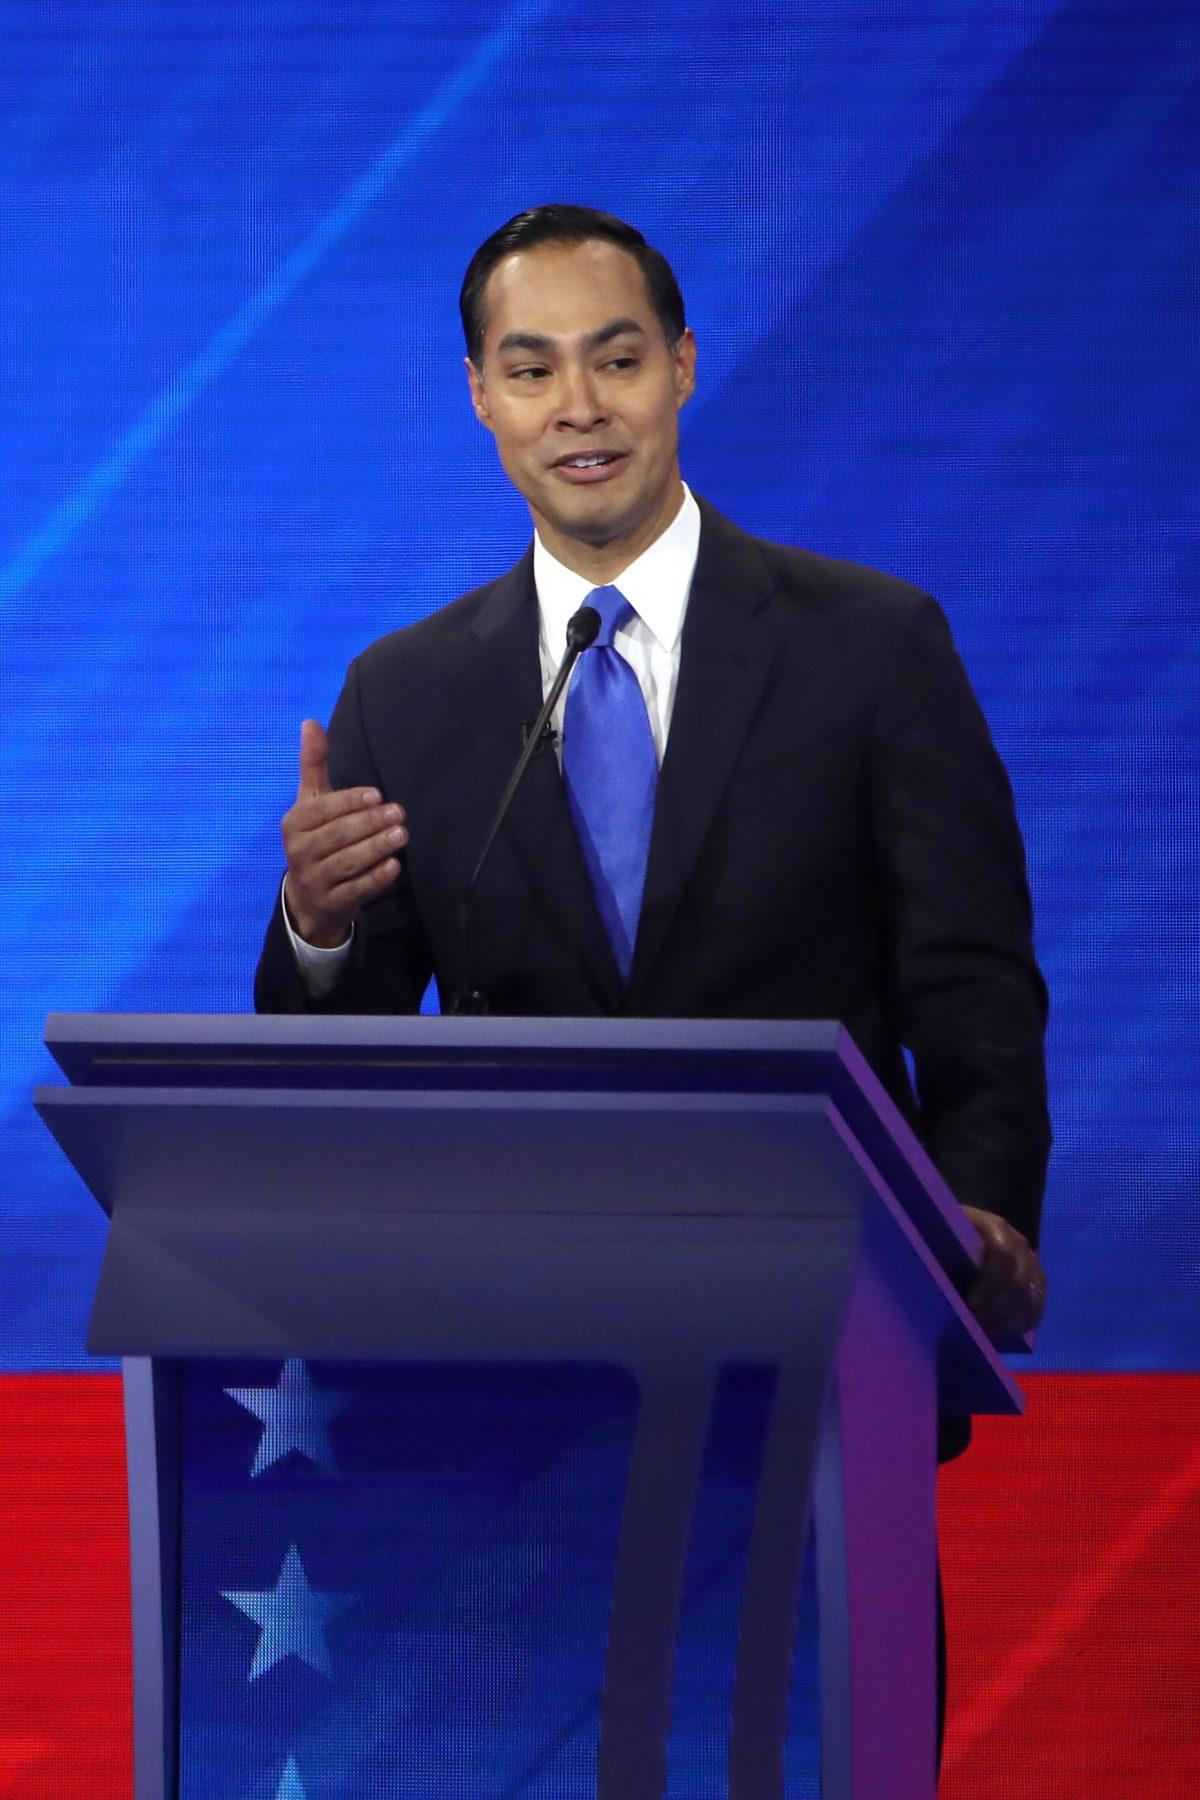 Democratic presidential candidate former housing secretary Julian Castro speaks during the Democratic presidential debate in Houston, Texas on Sept. 12, 2019. (Win McNamee/Getty Images)